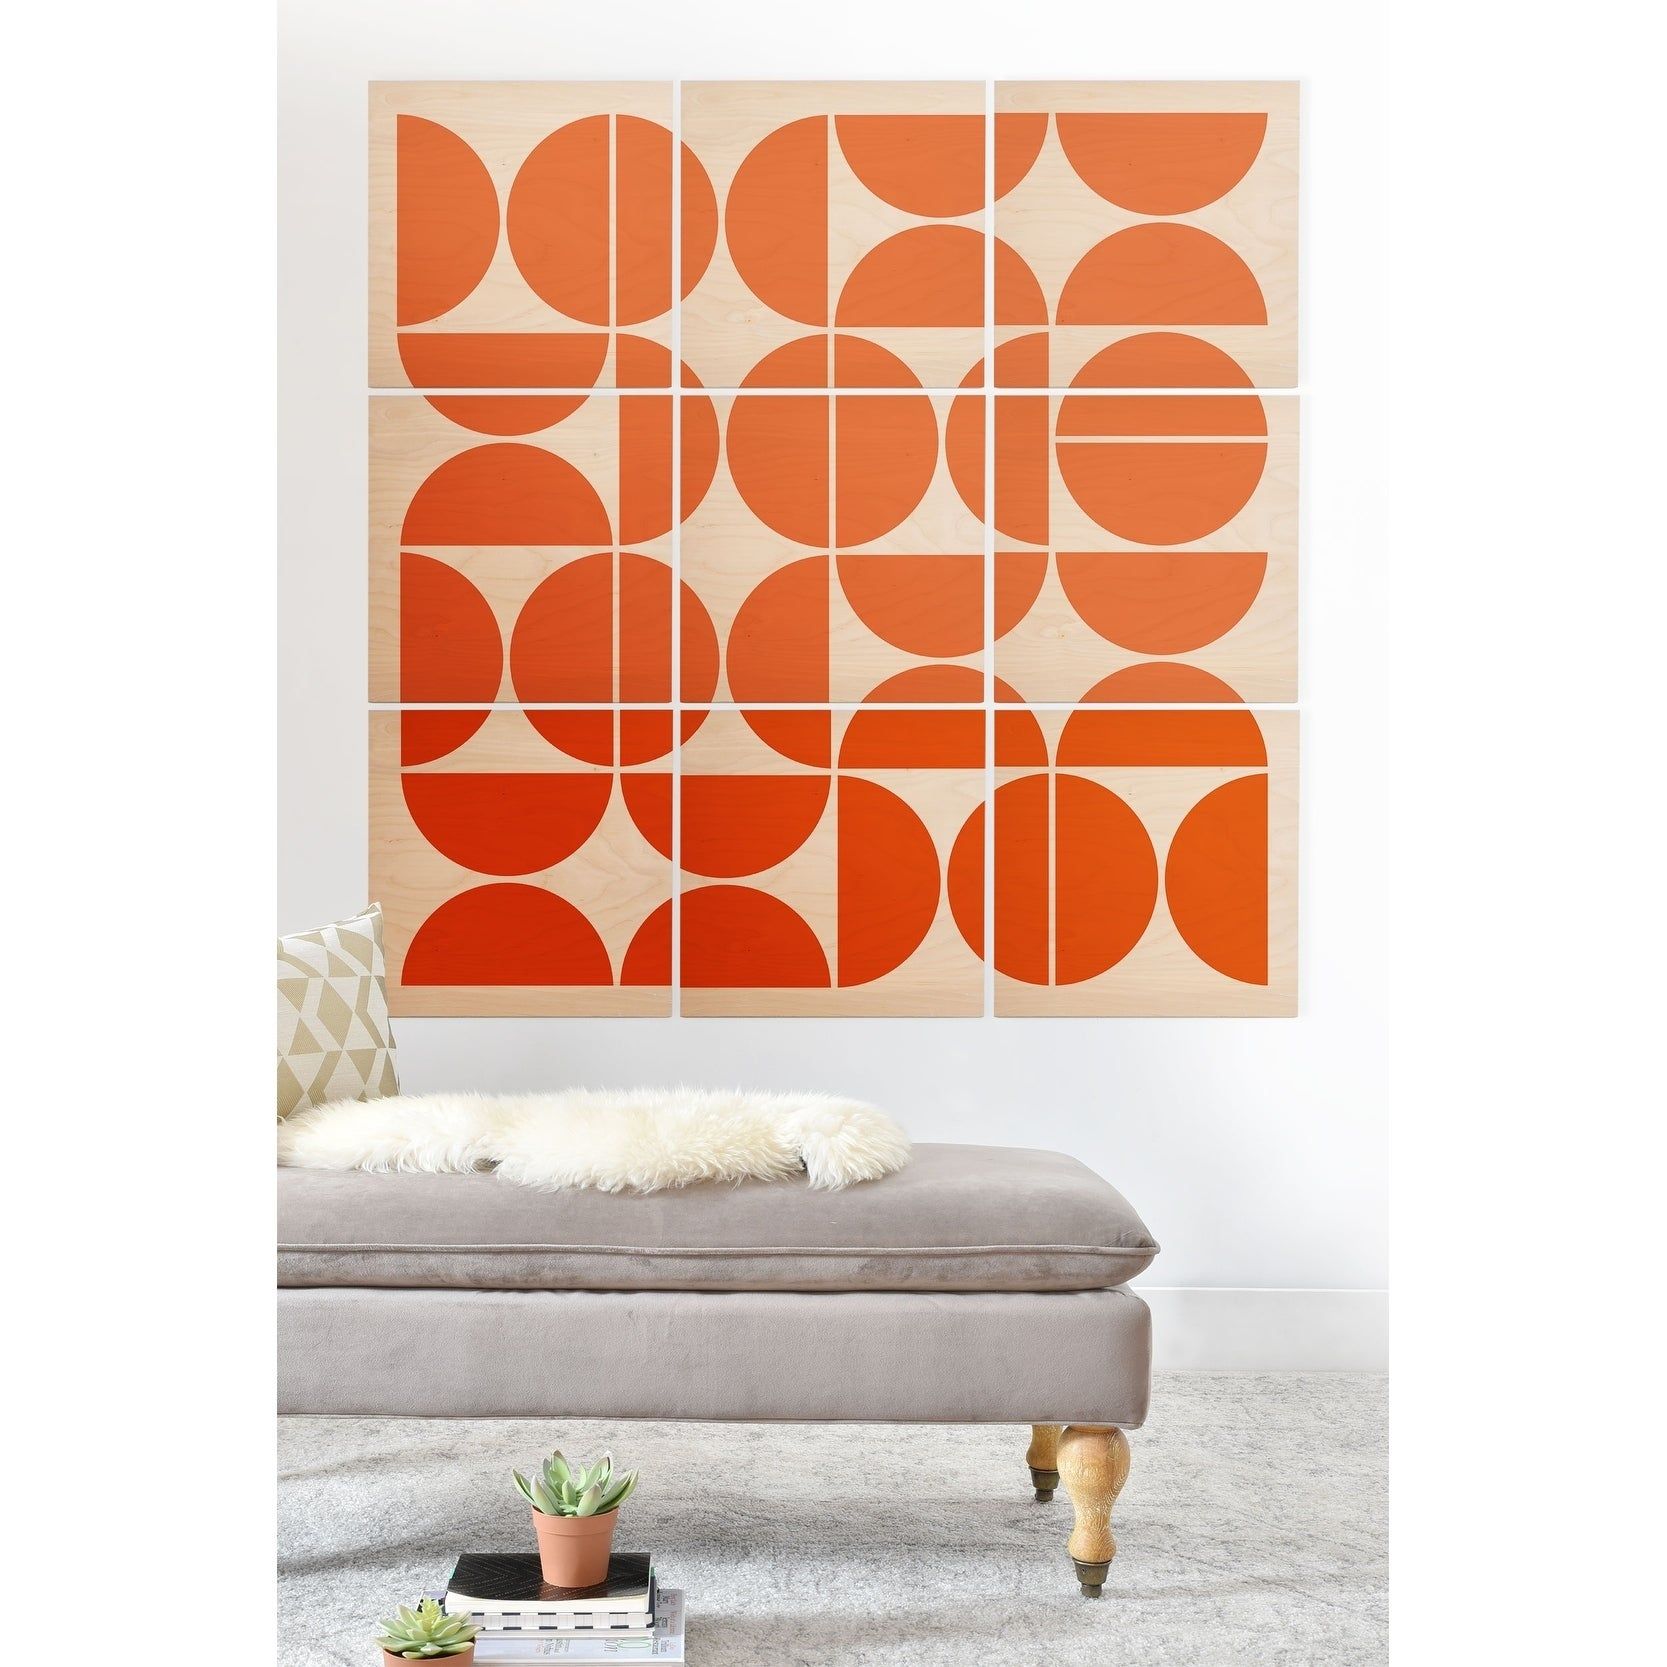 Deny Designs Mid Century Modern Orange Wood 9 Square Wall Mural – Overstock  – 25775932 Intended For Most Up To Date Orange Wood Wall Art (View 3 of 20)